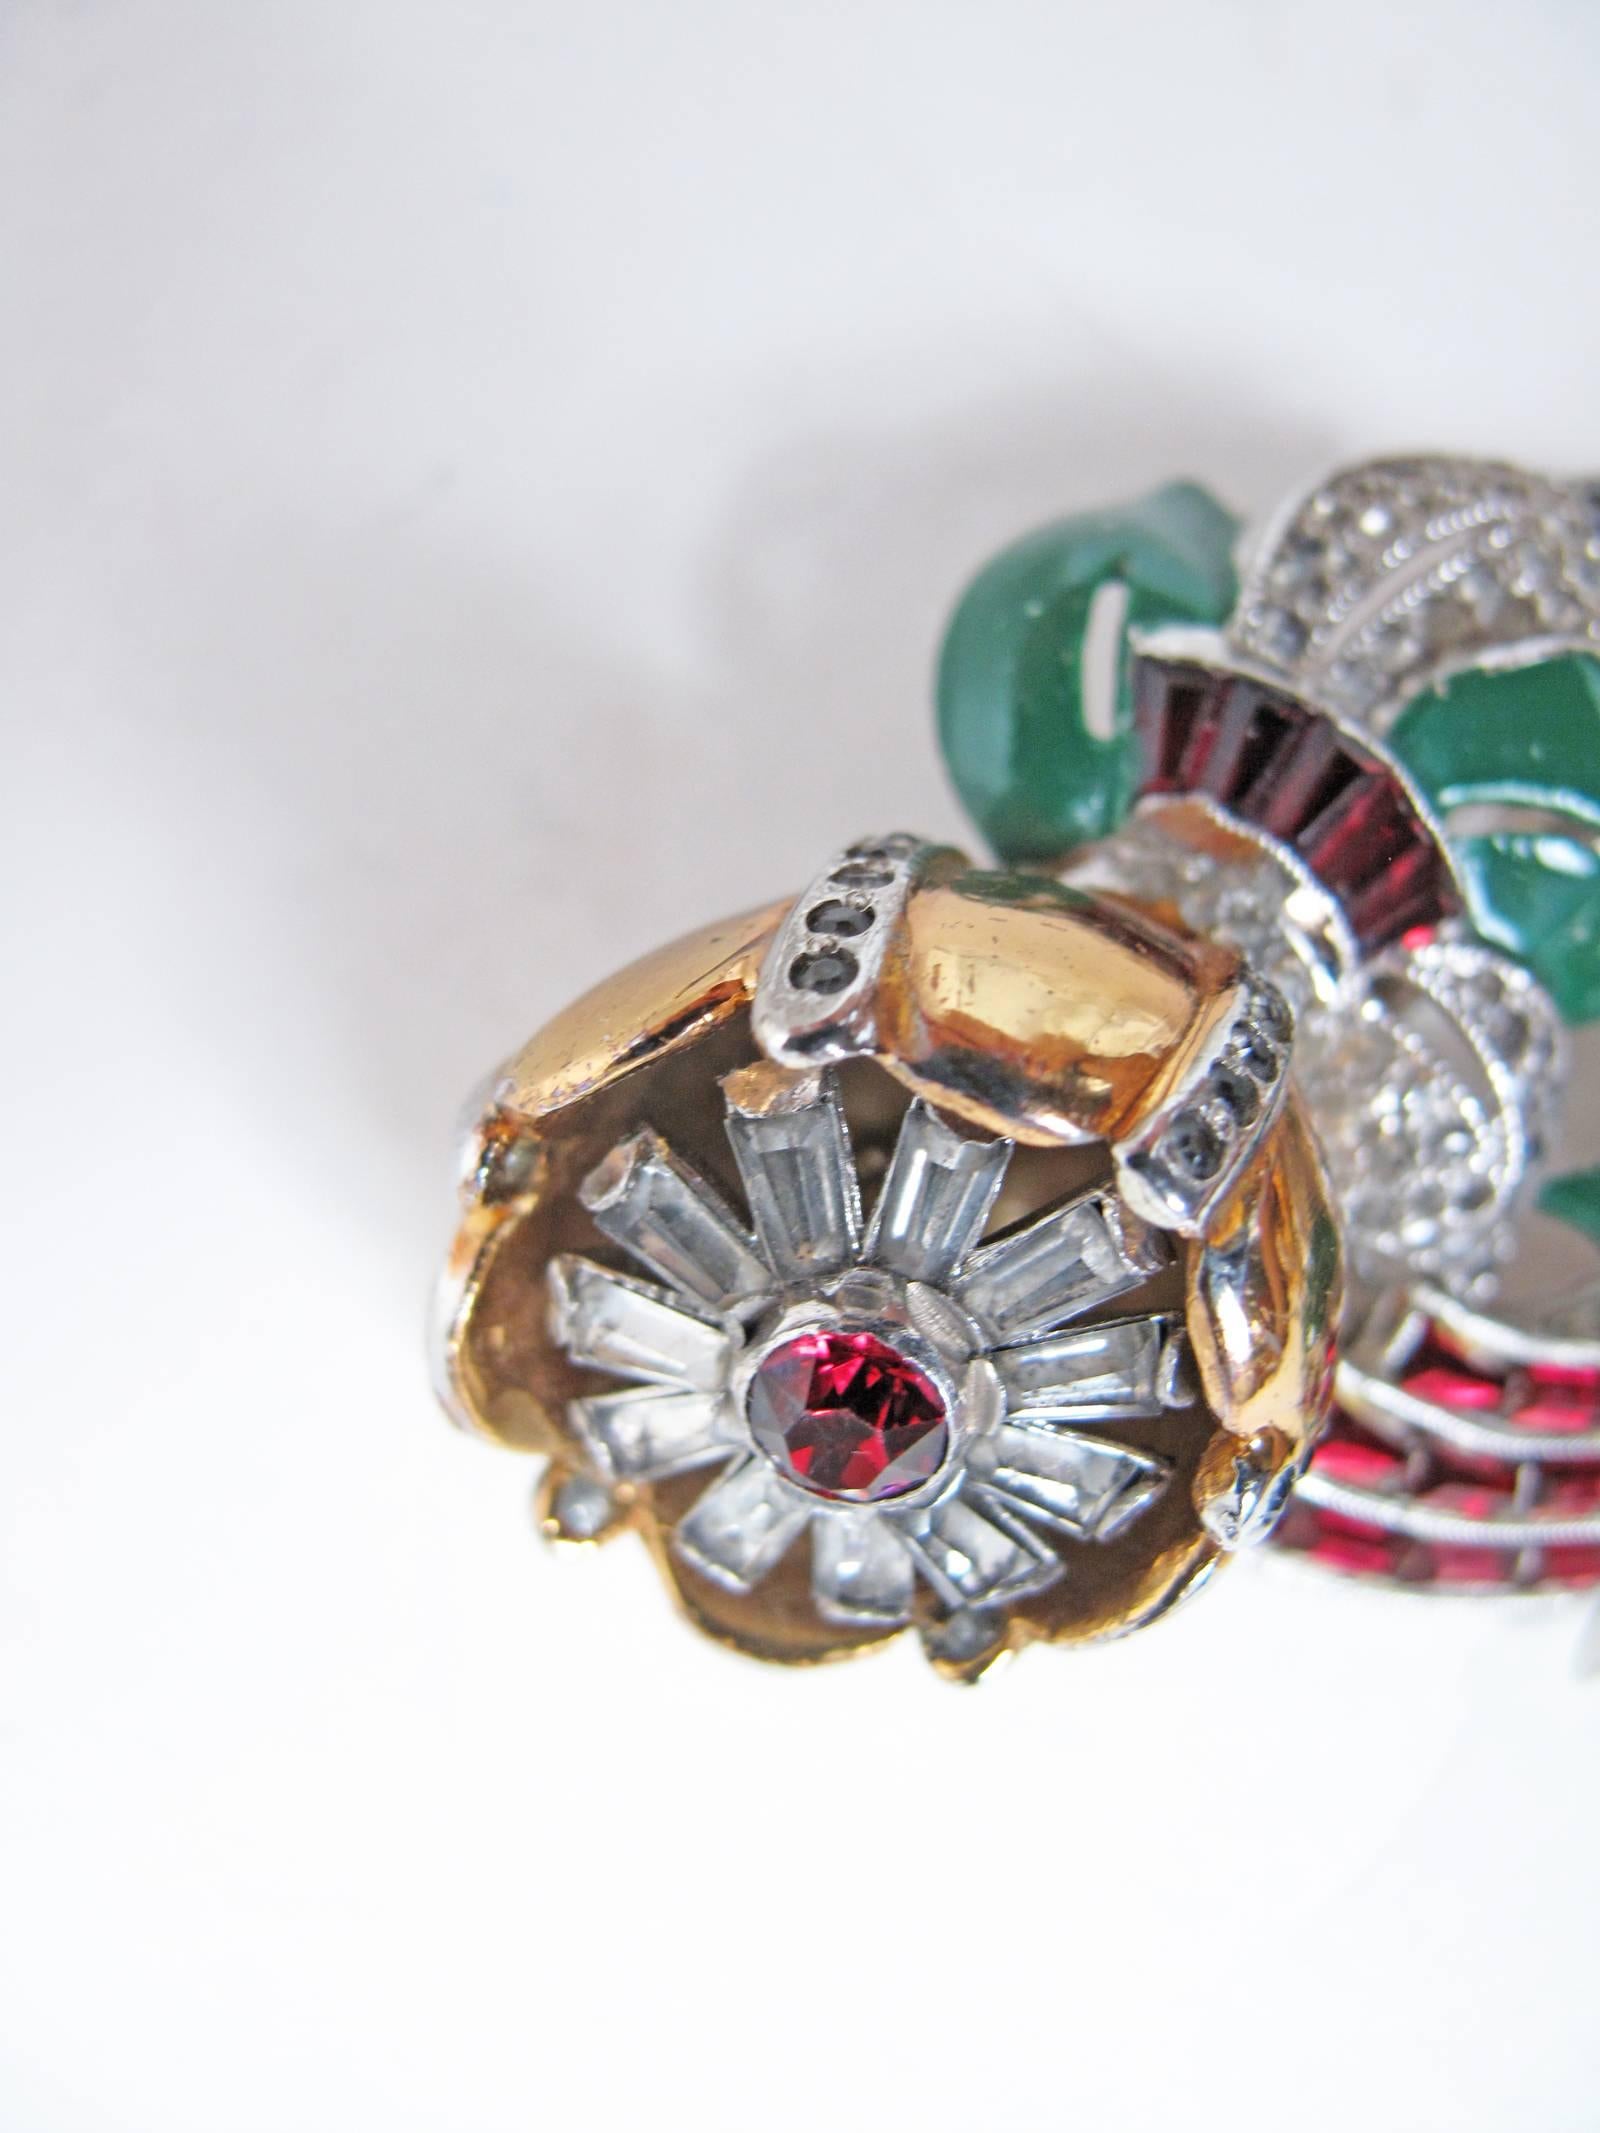 1930s Coro Duette rhinestone and enamel brooch or dress clip.  Condition: very good some enamel has chipped.  
3" W x 1 1/2" H 
